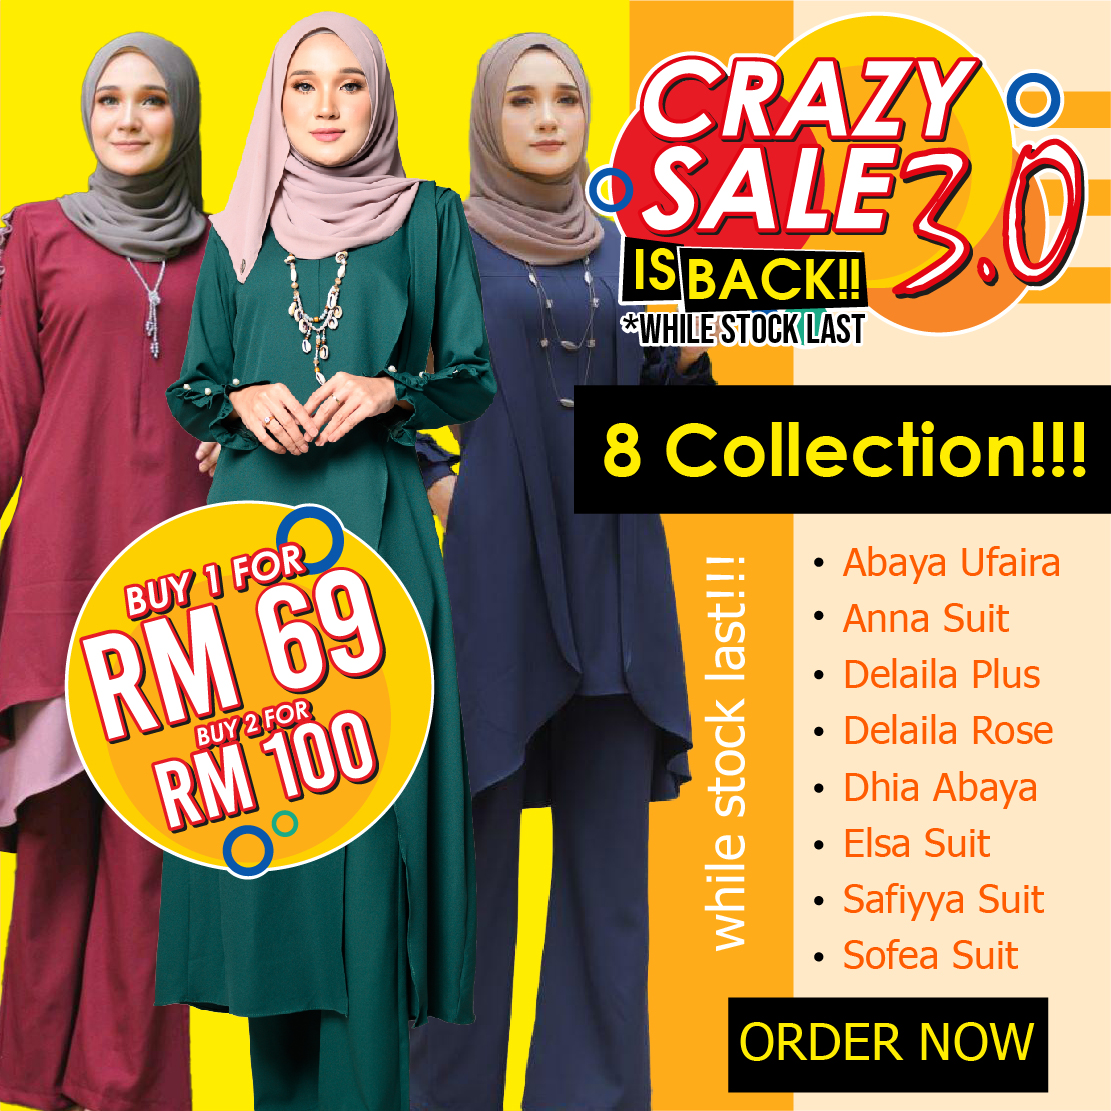 Crazy Sale 3.0 is Back!!! Hurry place your order Now!!